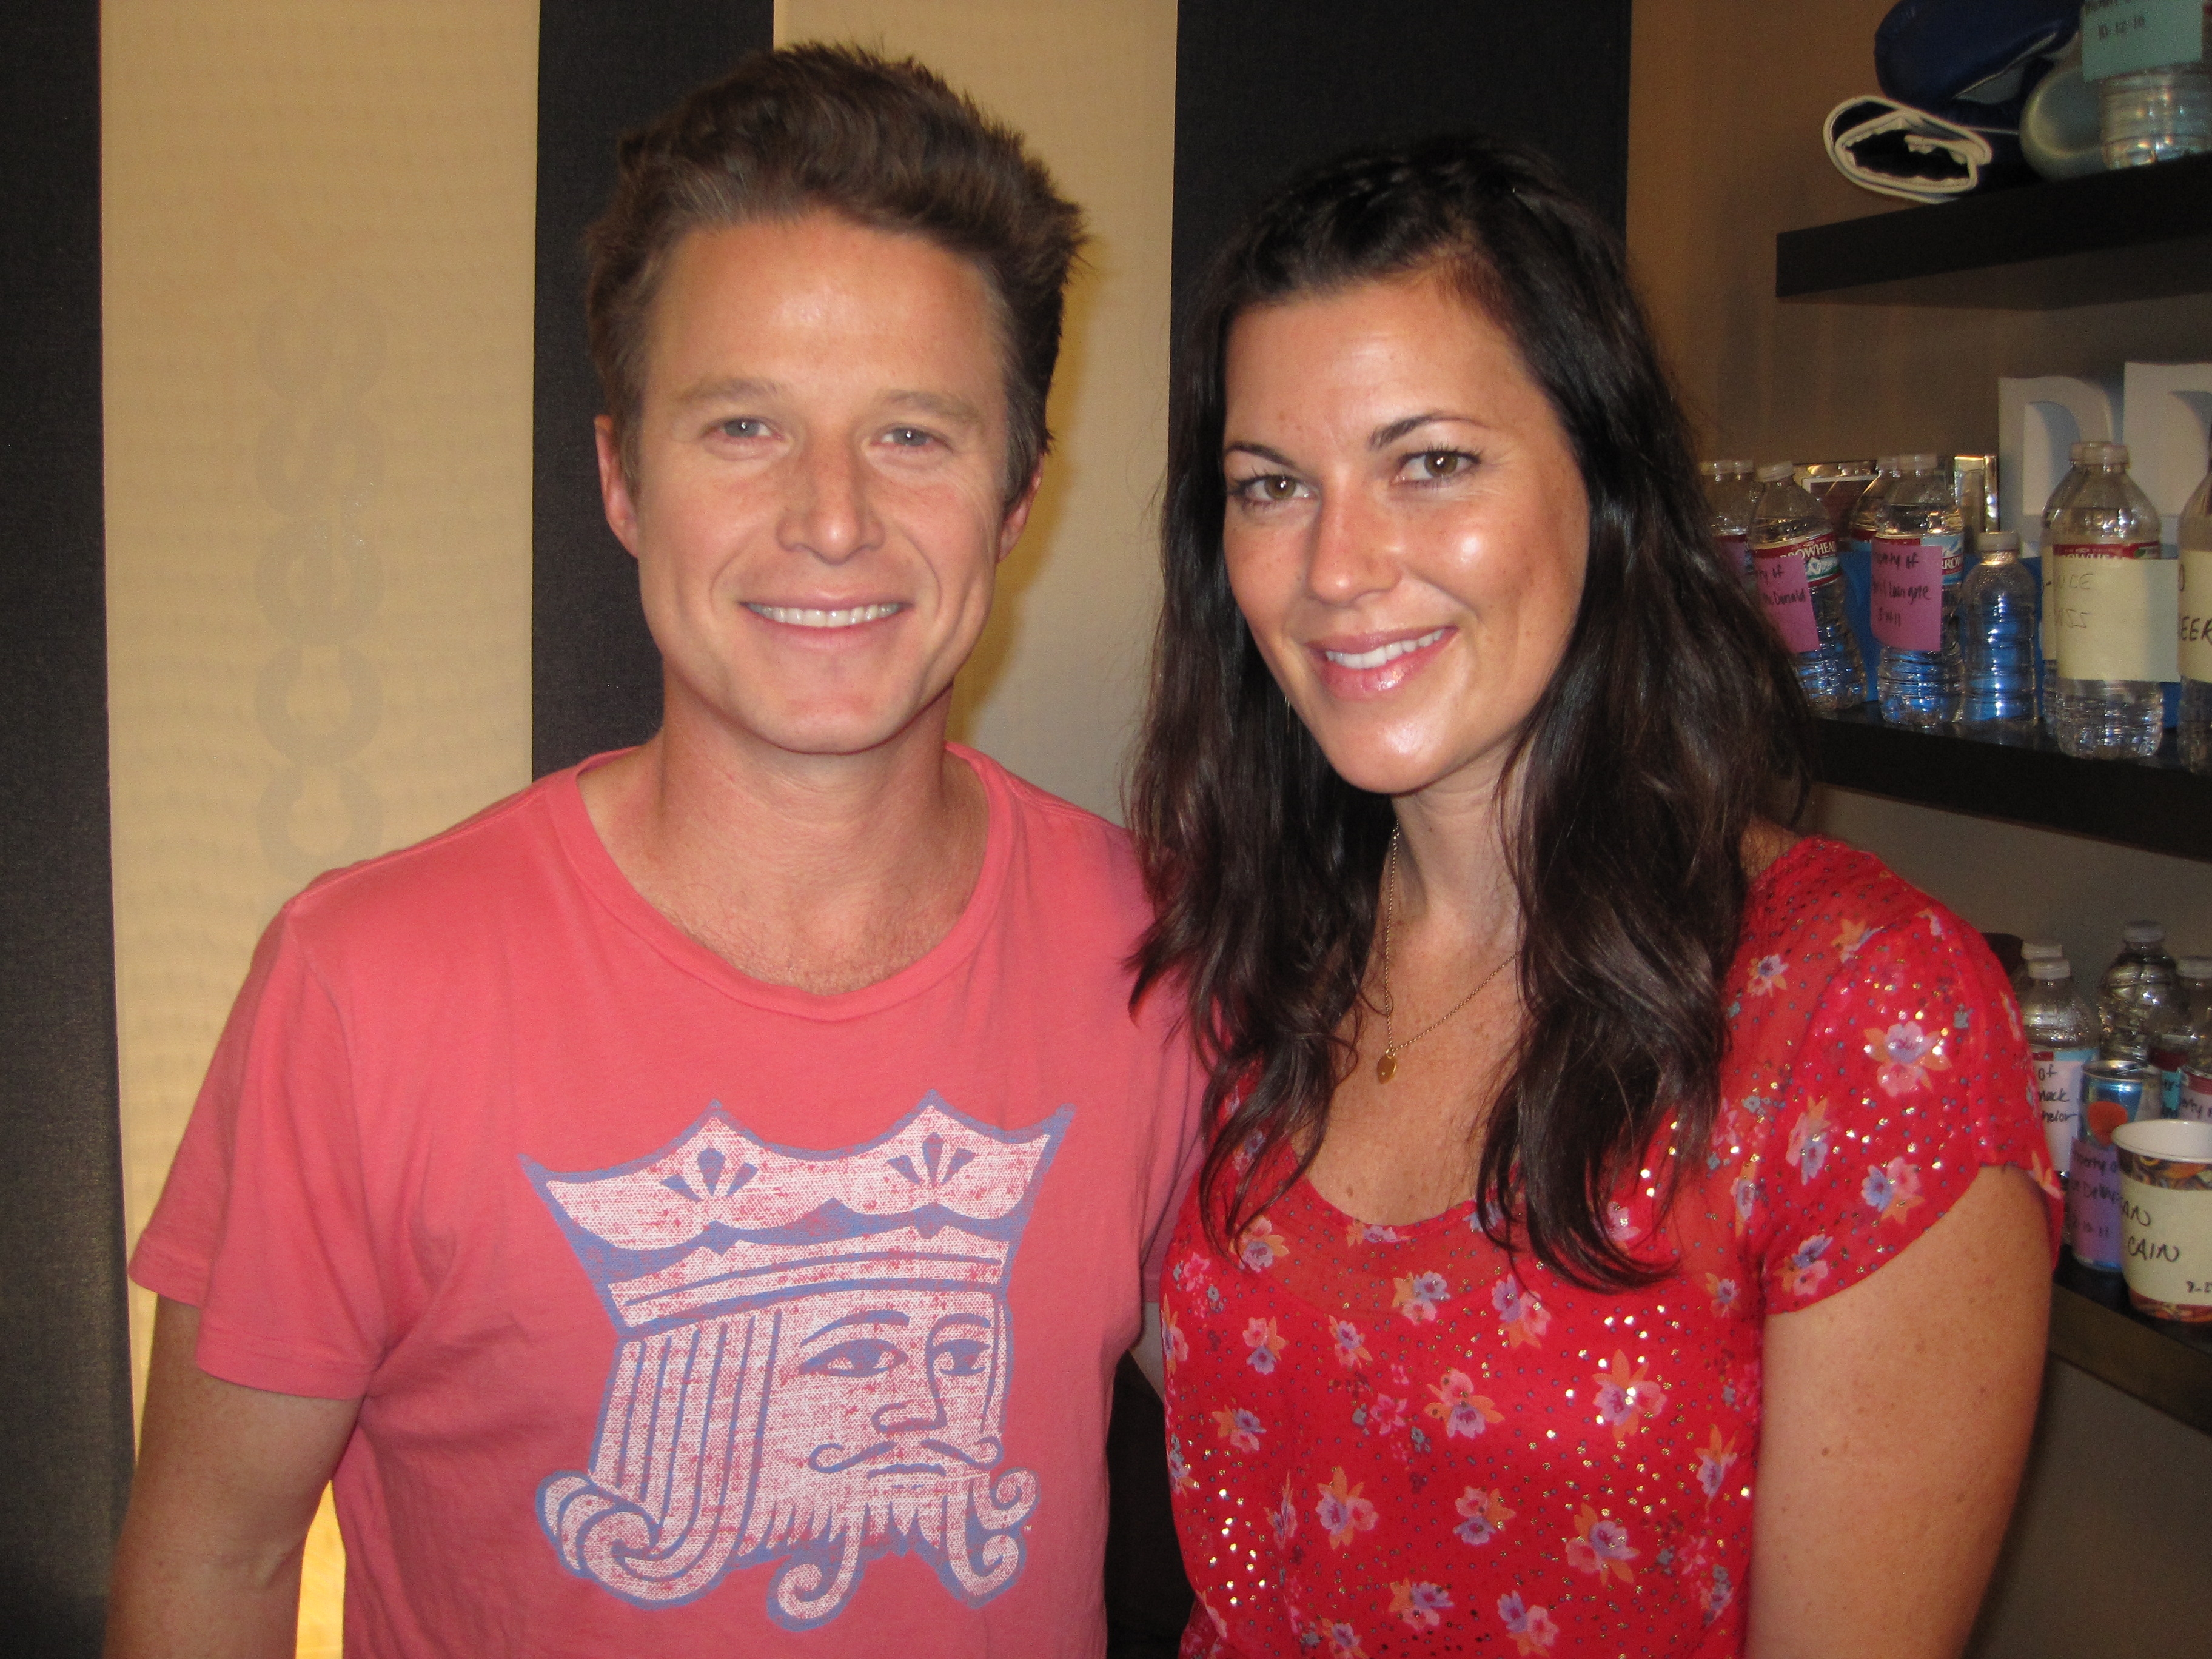 Billy Bush meets up with Tristan Prettyman